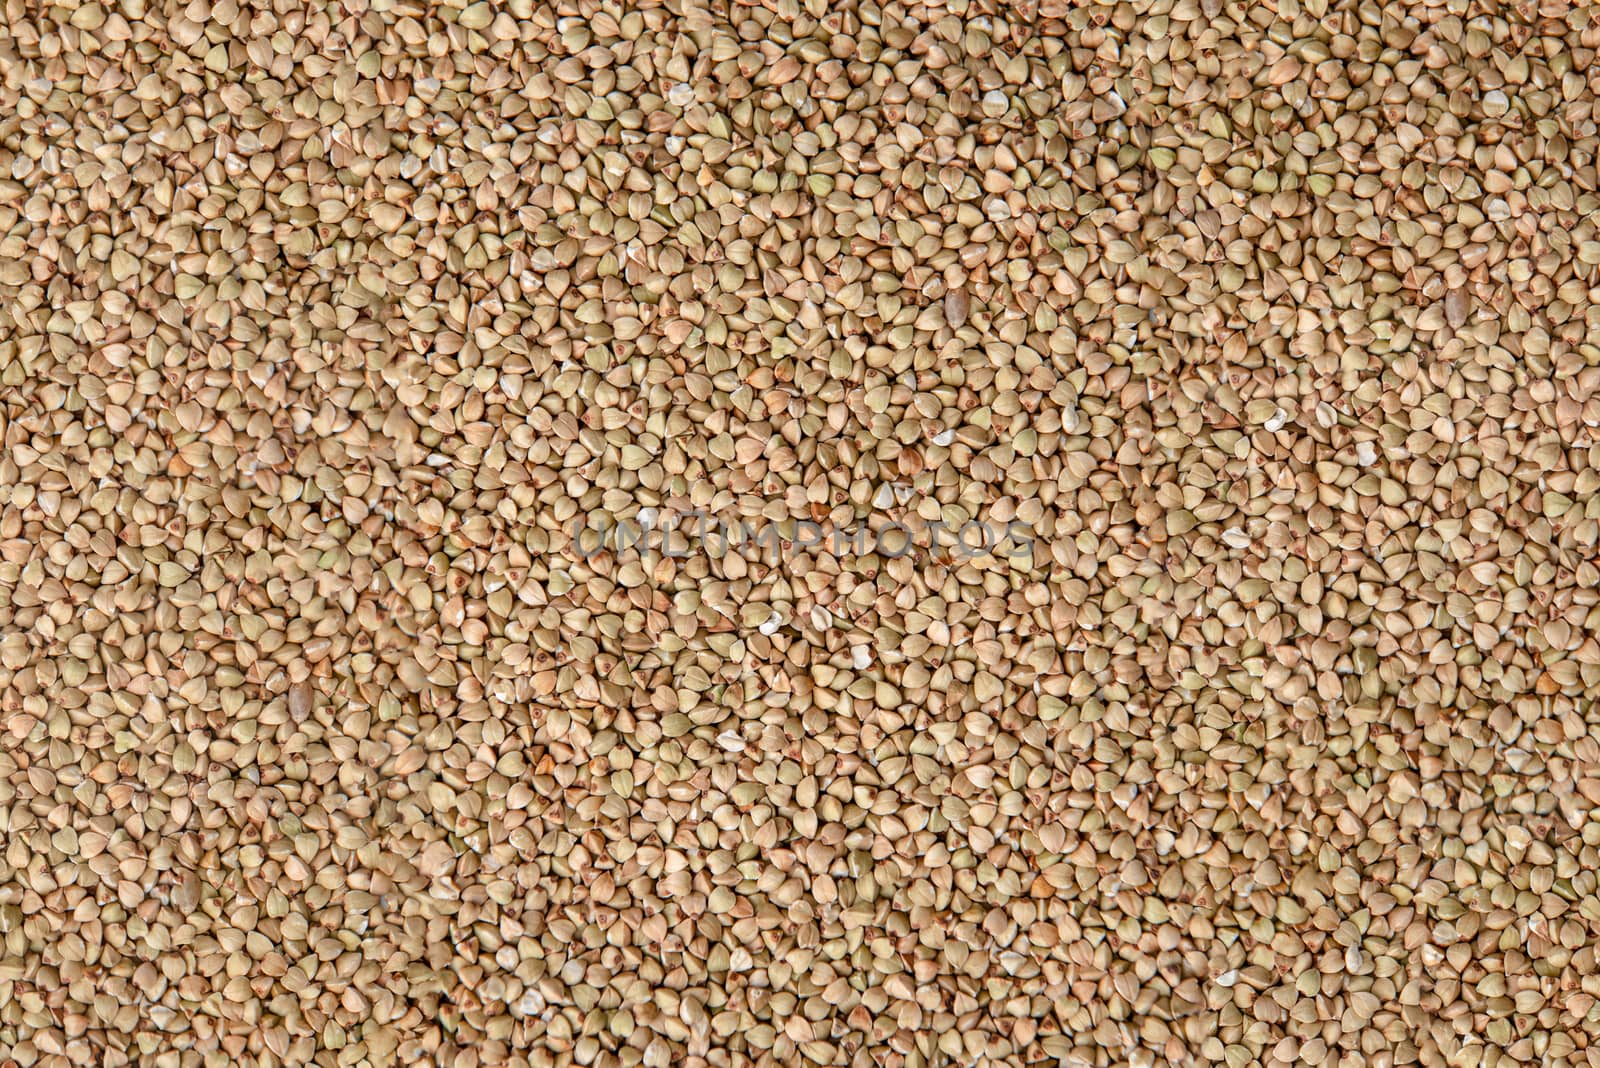 Dry buckwheat grains background with copy space